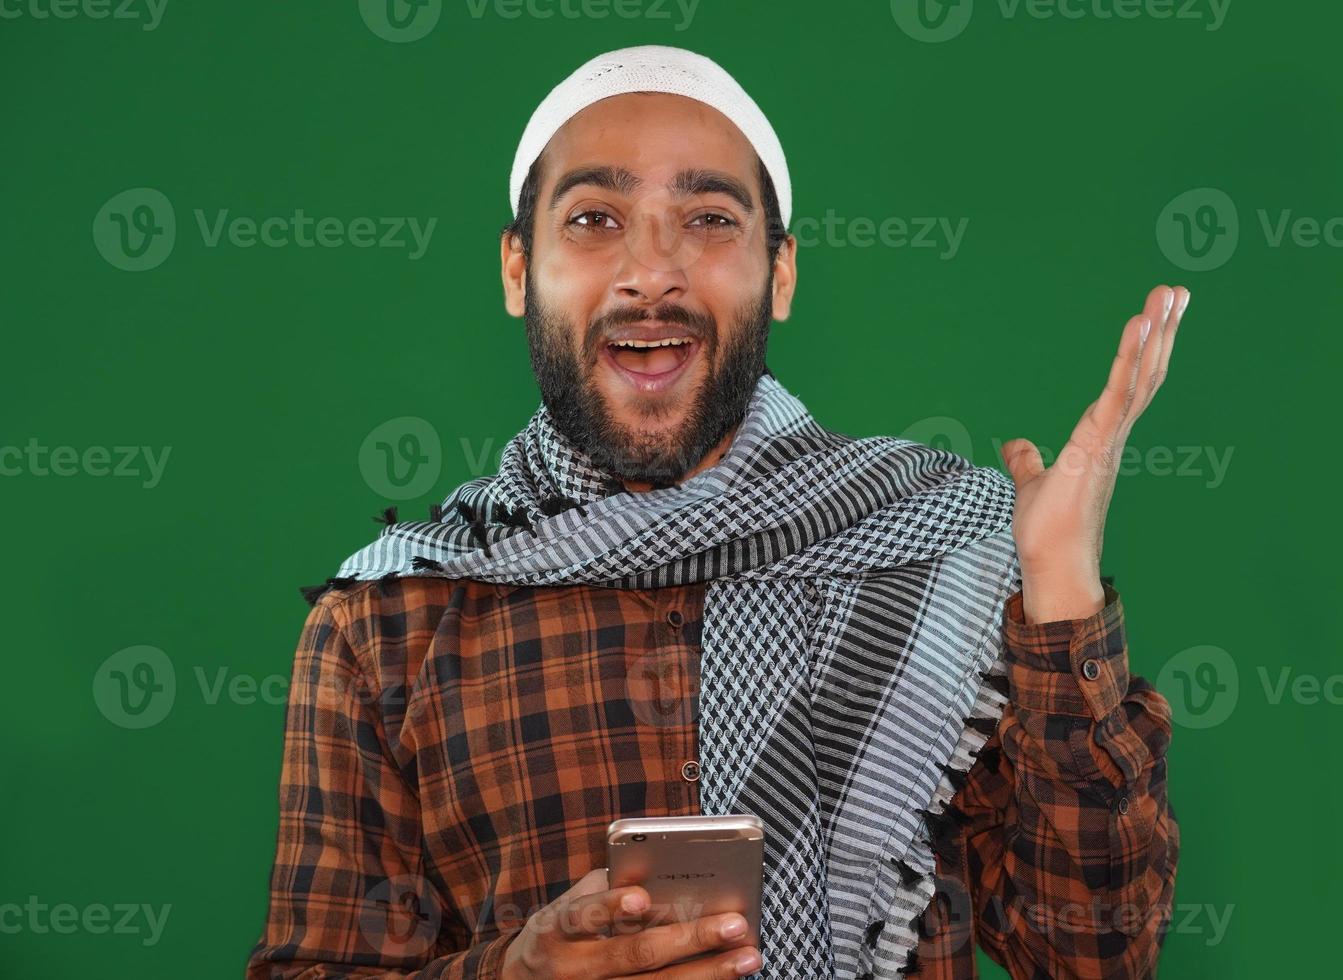 Indian muslim religious man received an exiting news on Green screen background. photo